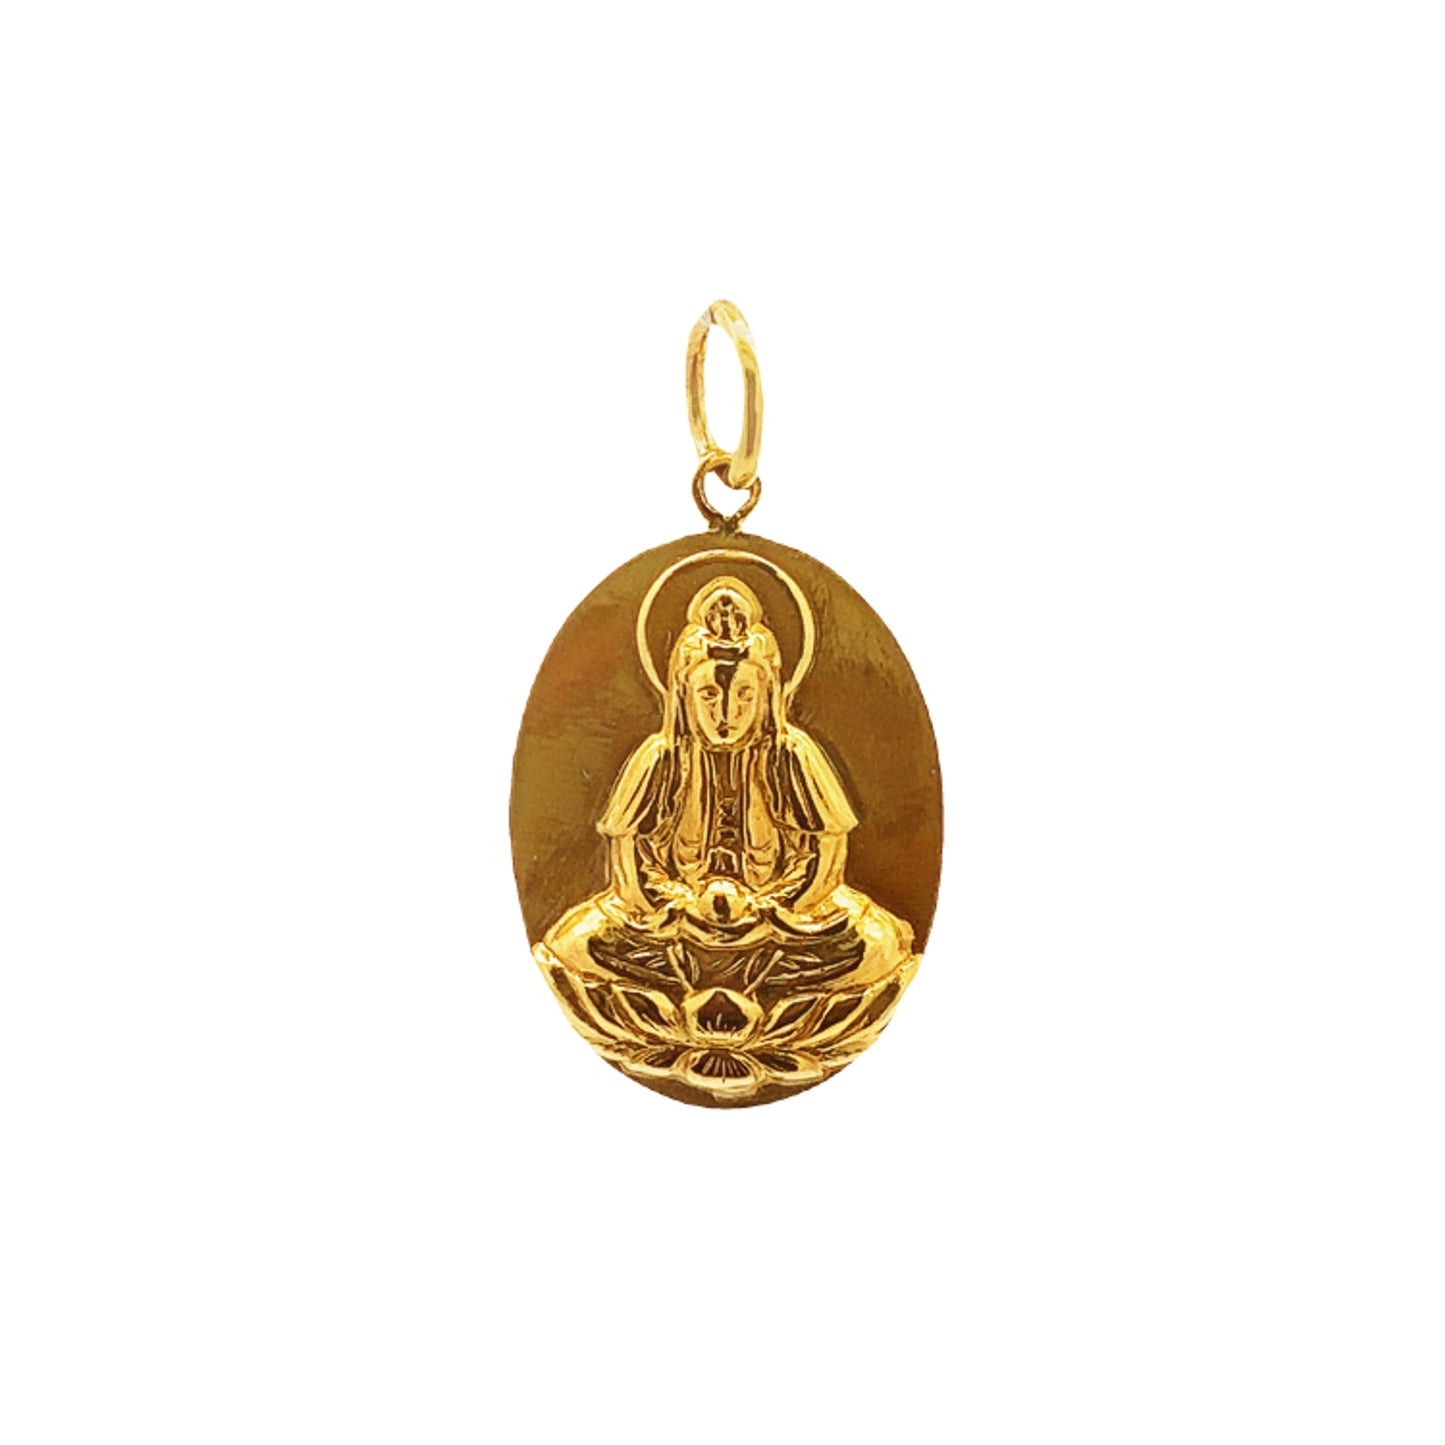 GOLD PENDANT ( 22K ) ( 3.6g ) - 0014112 Chain sold separately